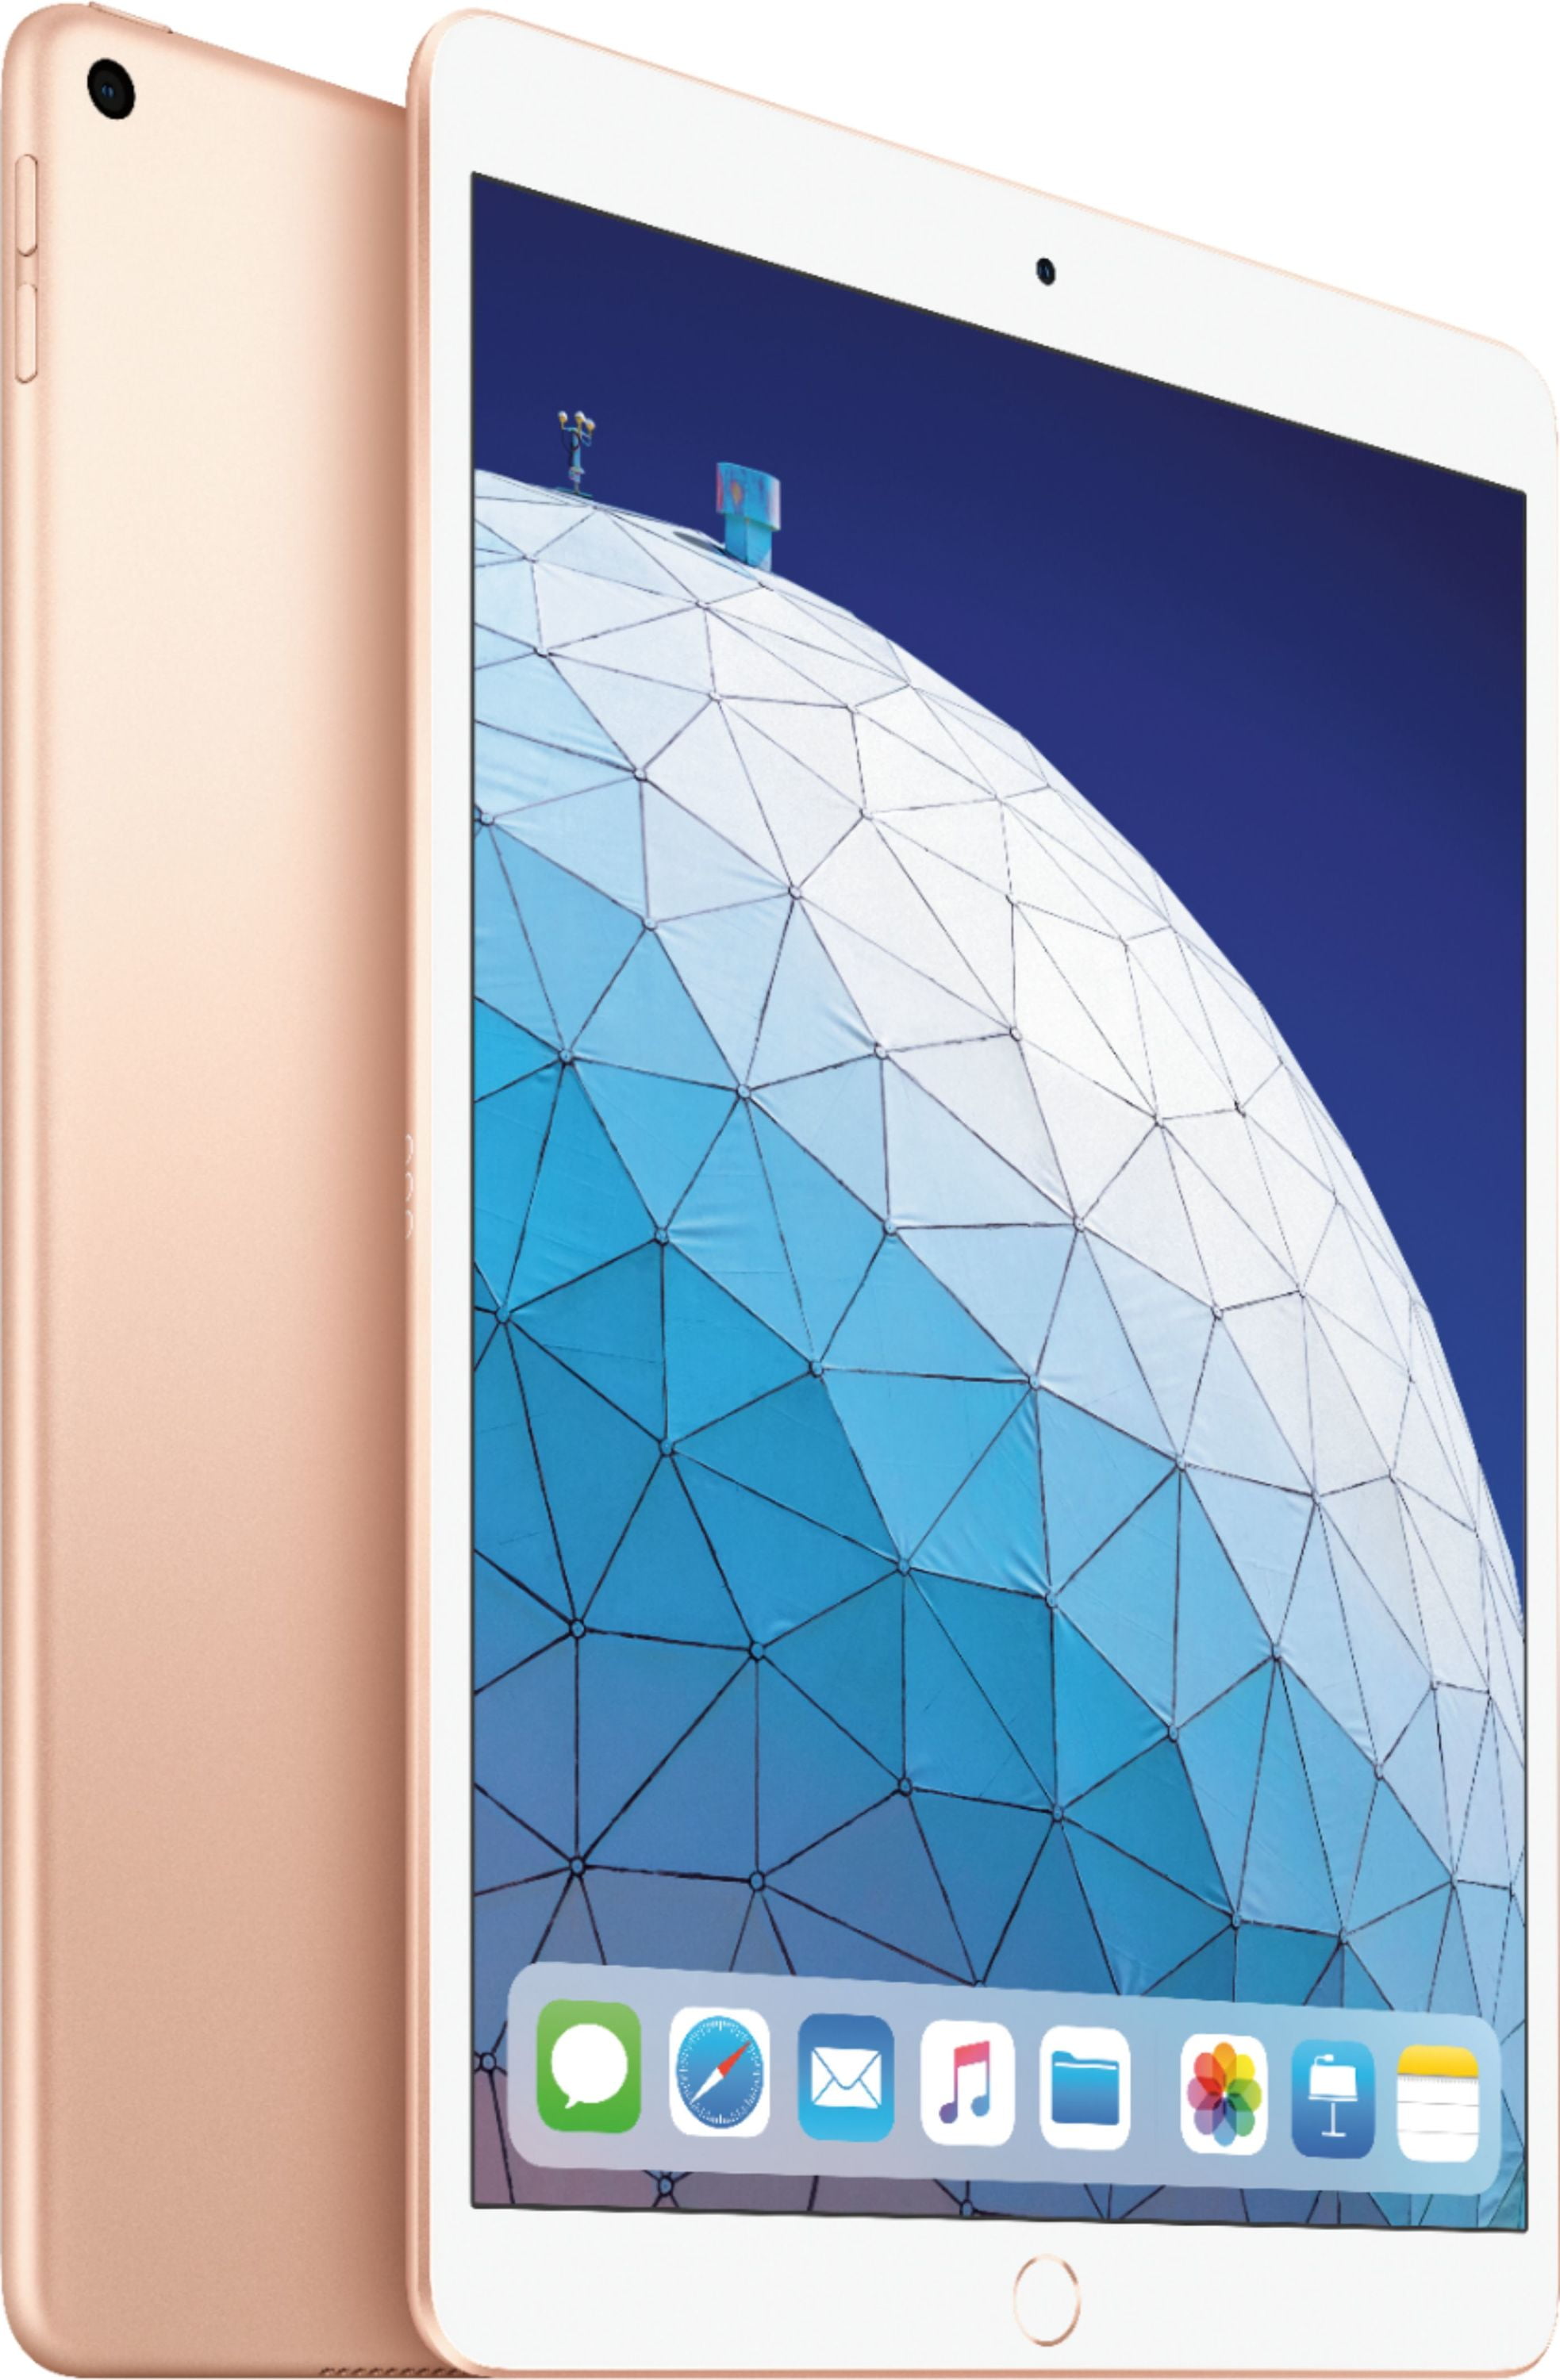 Apple iPad Air 3 64GB Wi-Fi Tablet (MUUL2LL/A) - Gold (Certified Used)